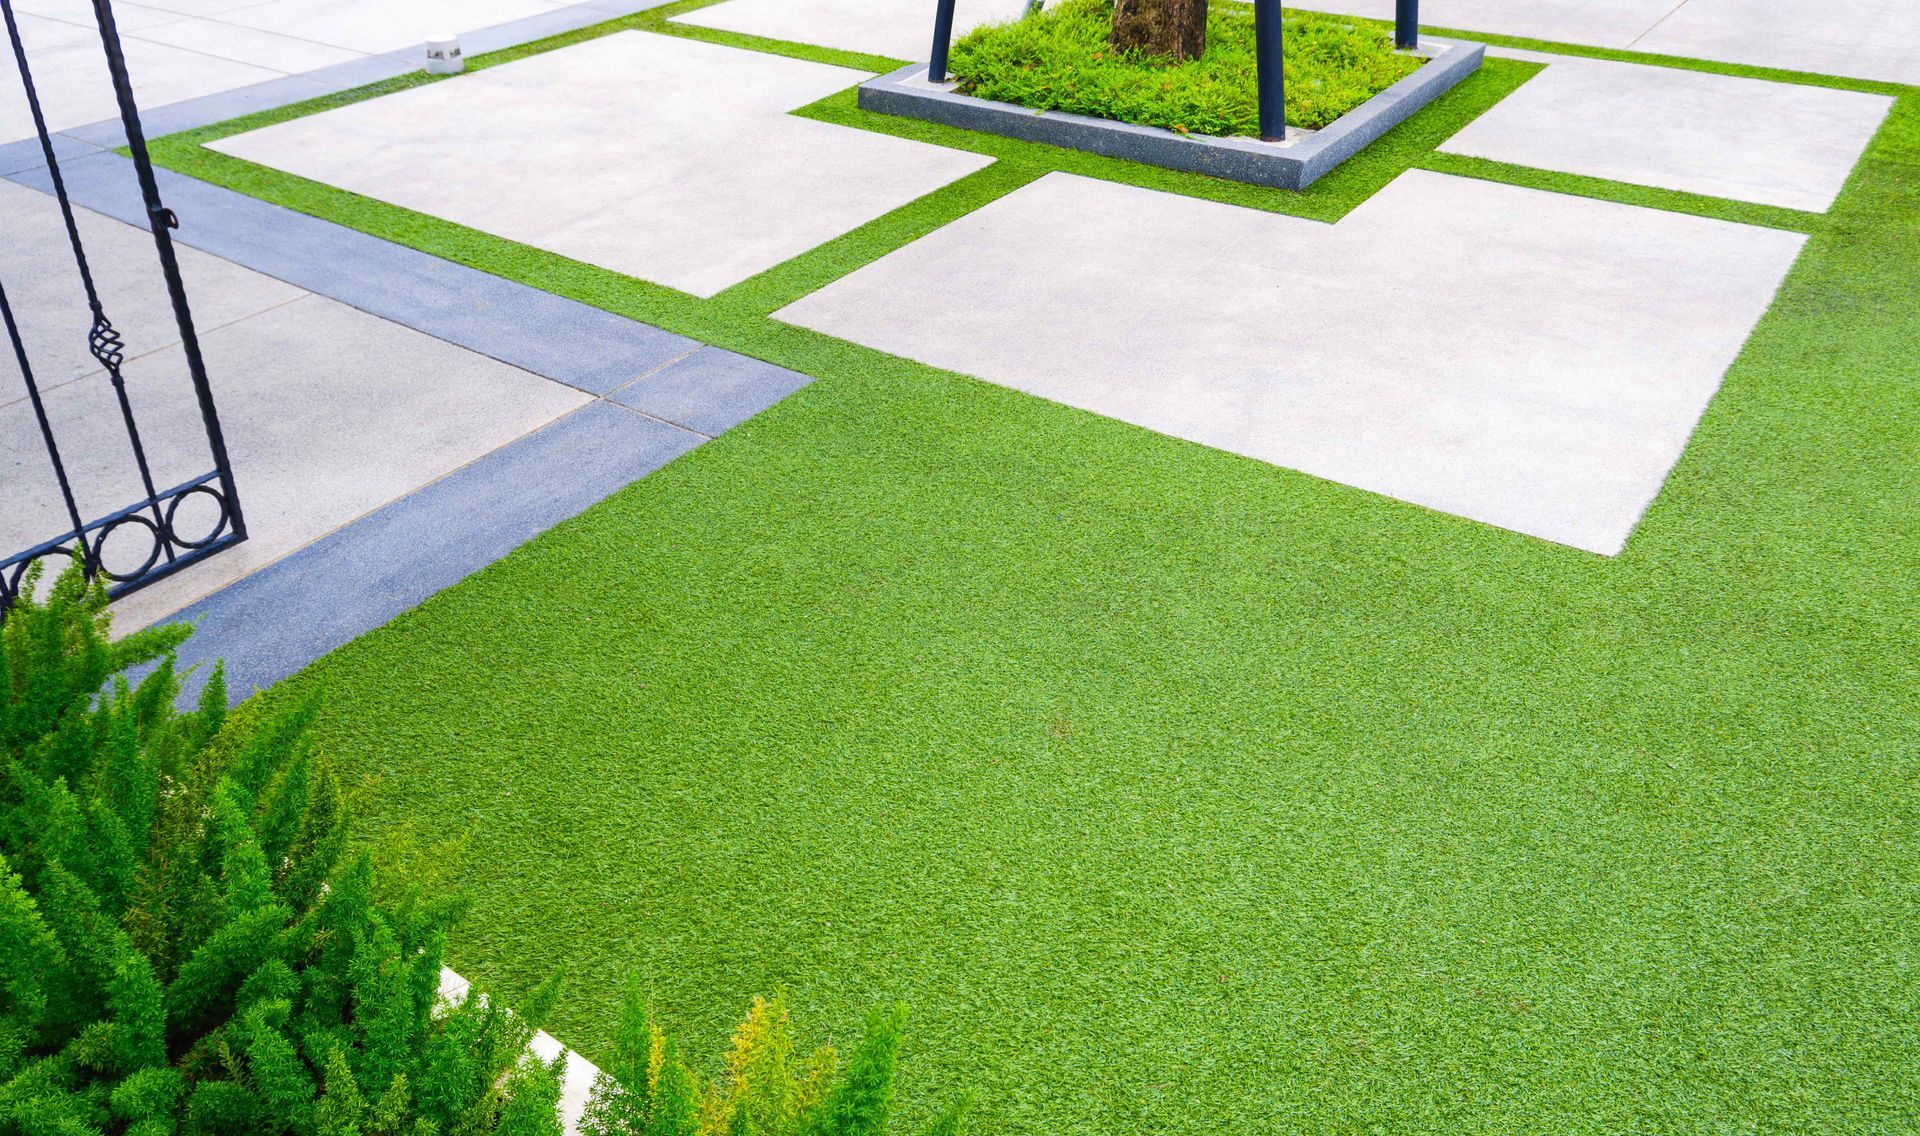 Affordable Artificial Turf Around Smooth Paver Stones In Yard